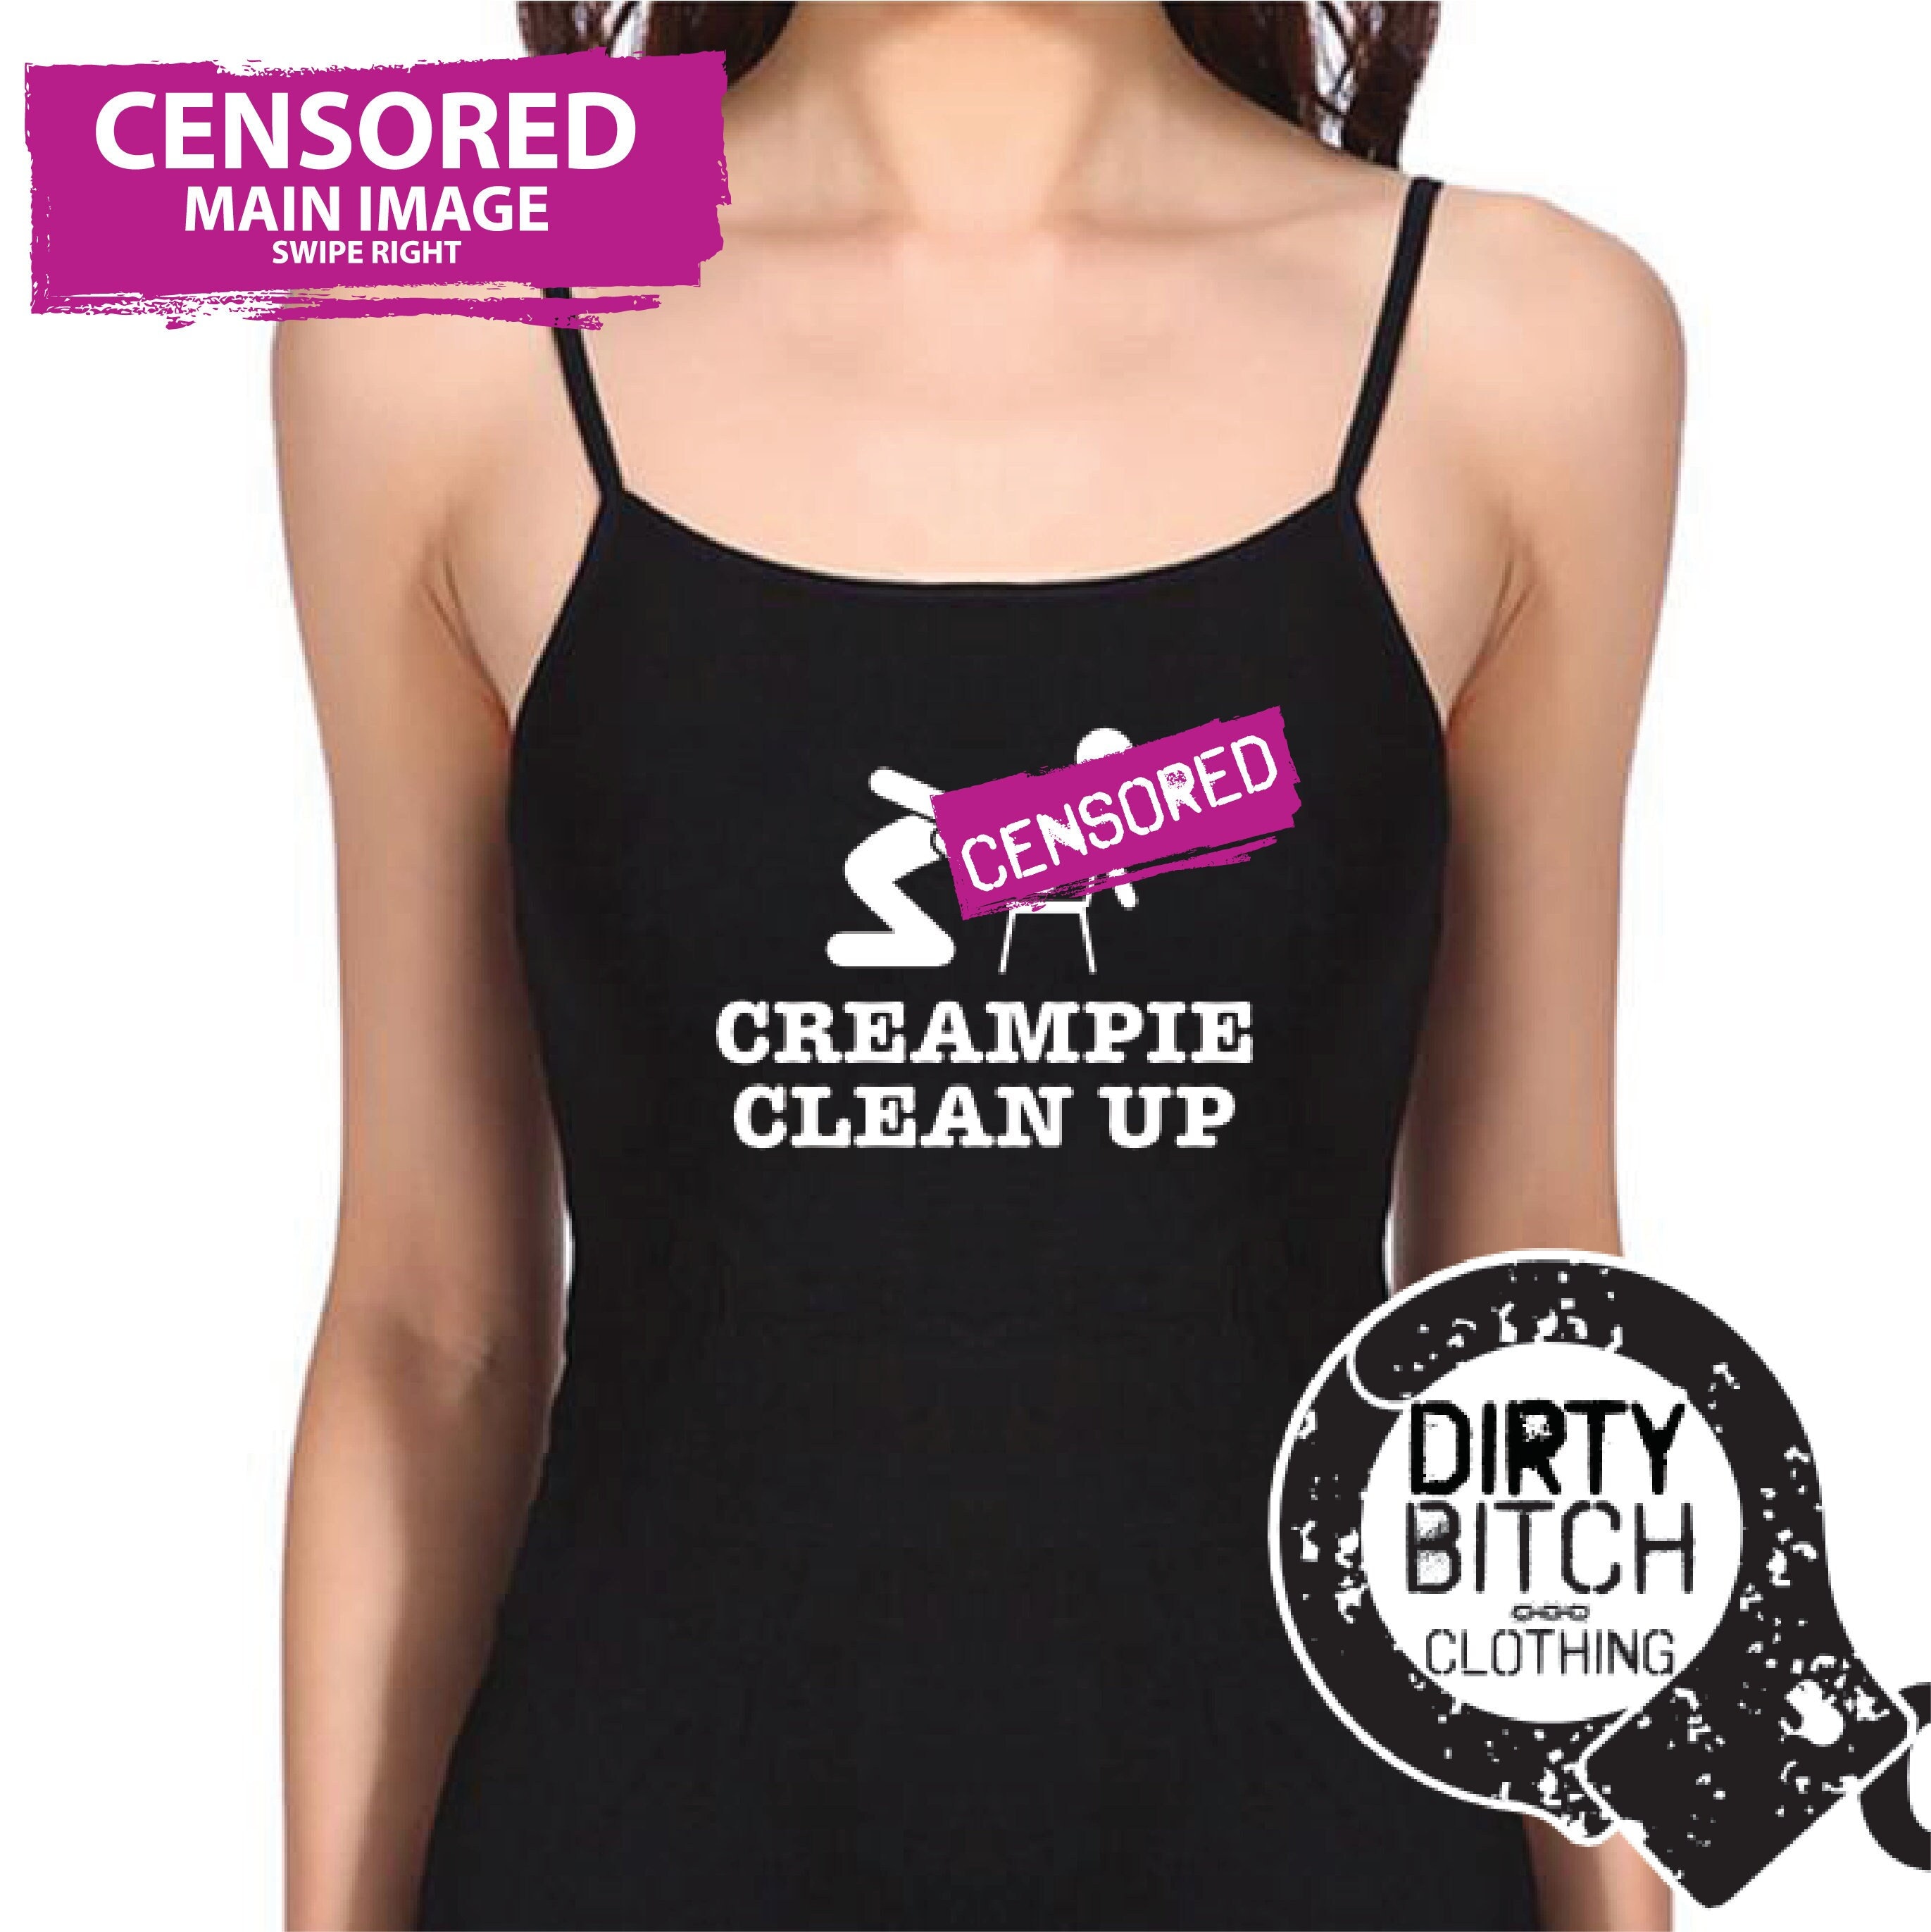 Creampie Clean up Adult T-shirt Clothing Boobs Hotwife image